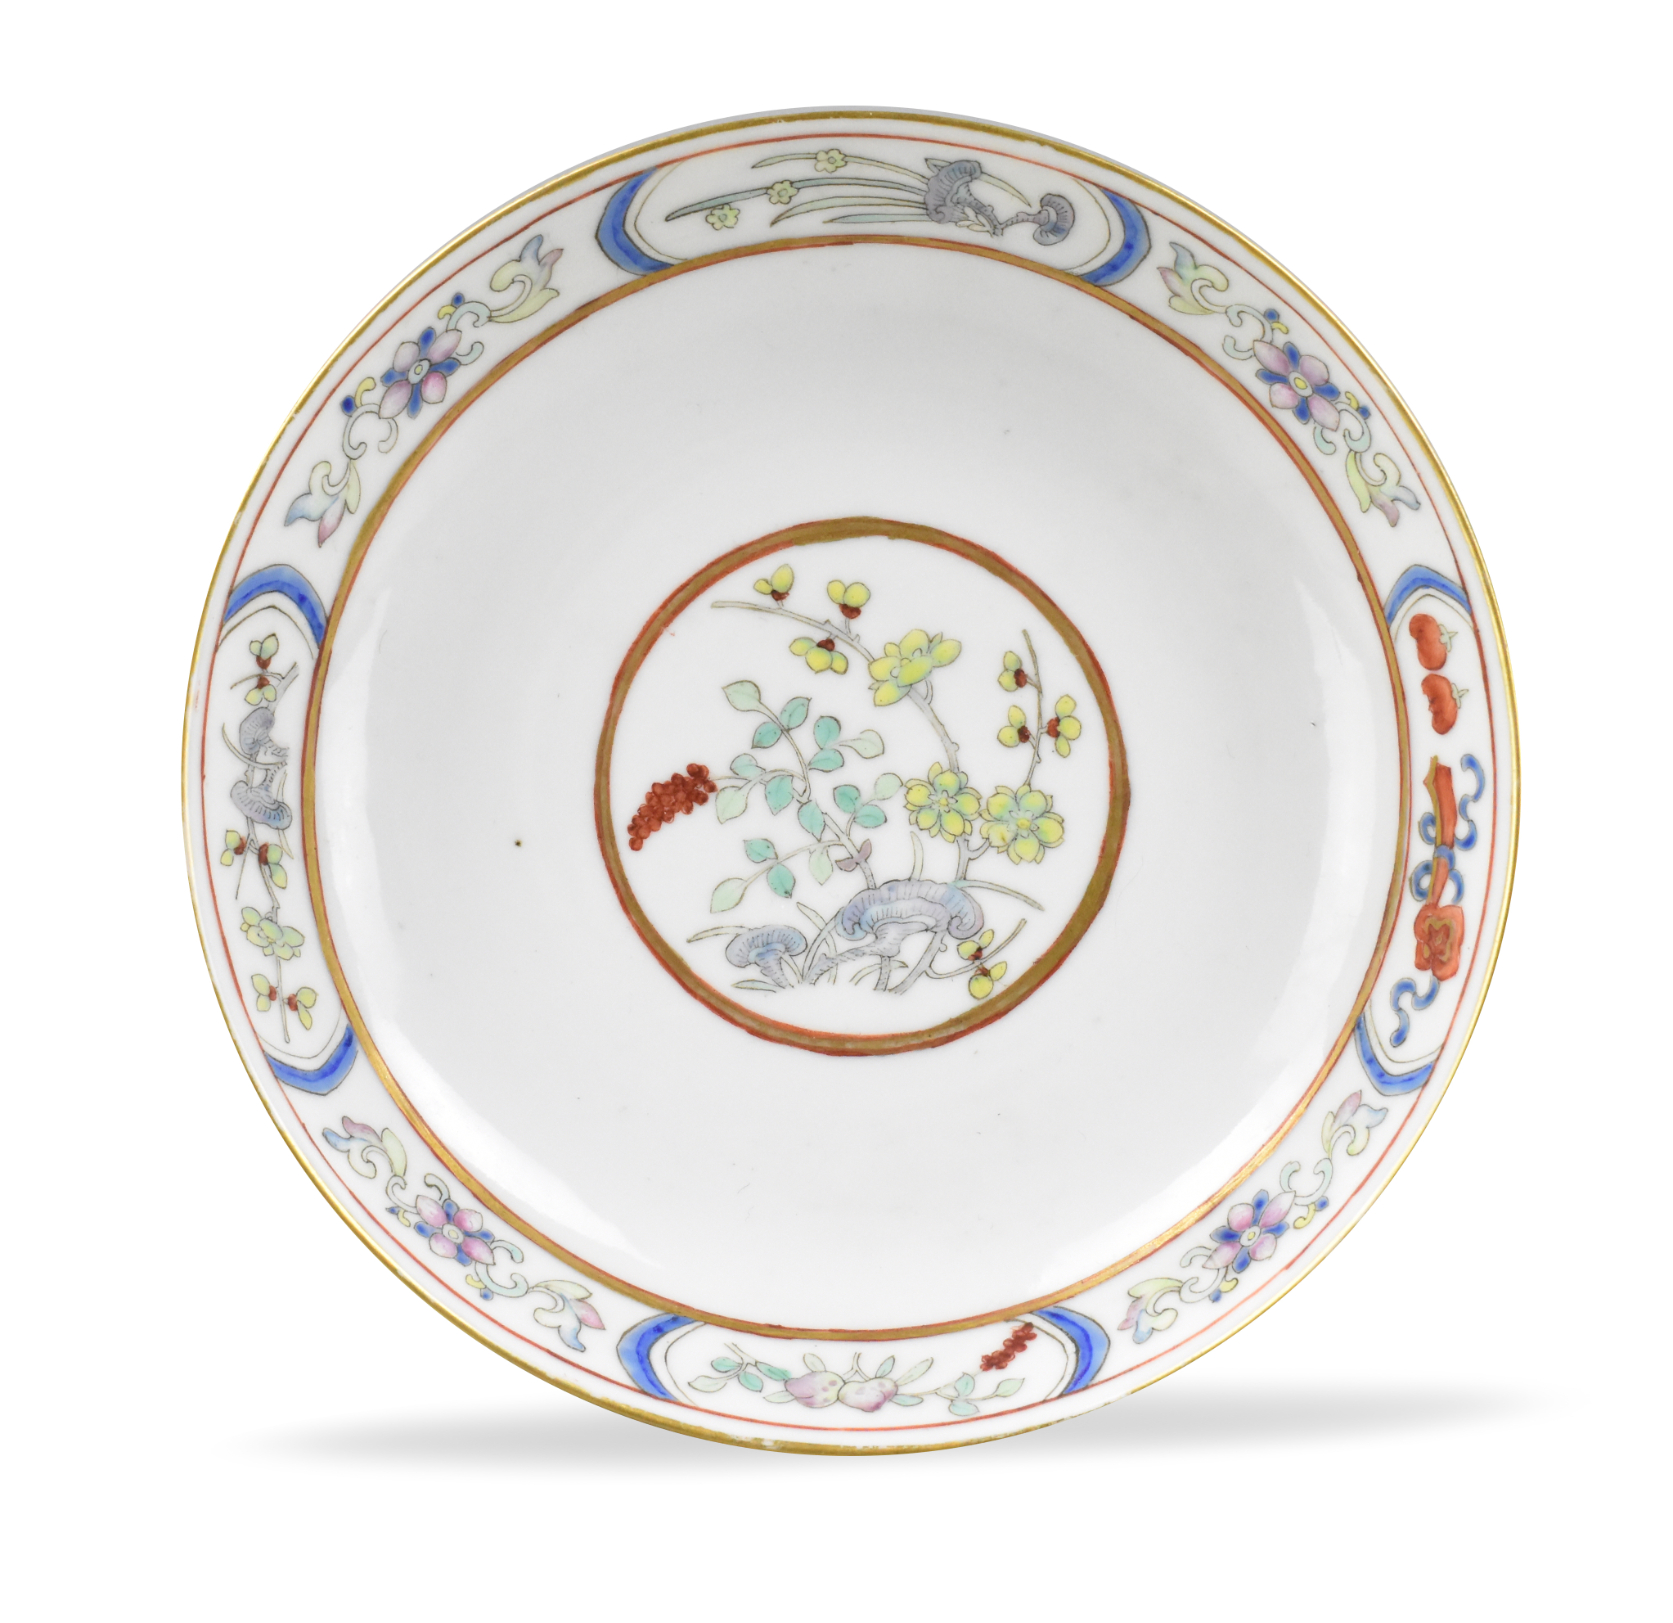 CHINESE ENAMELED FAMILLE ROSE PLATE